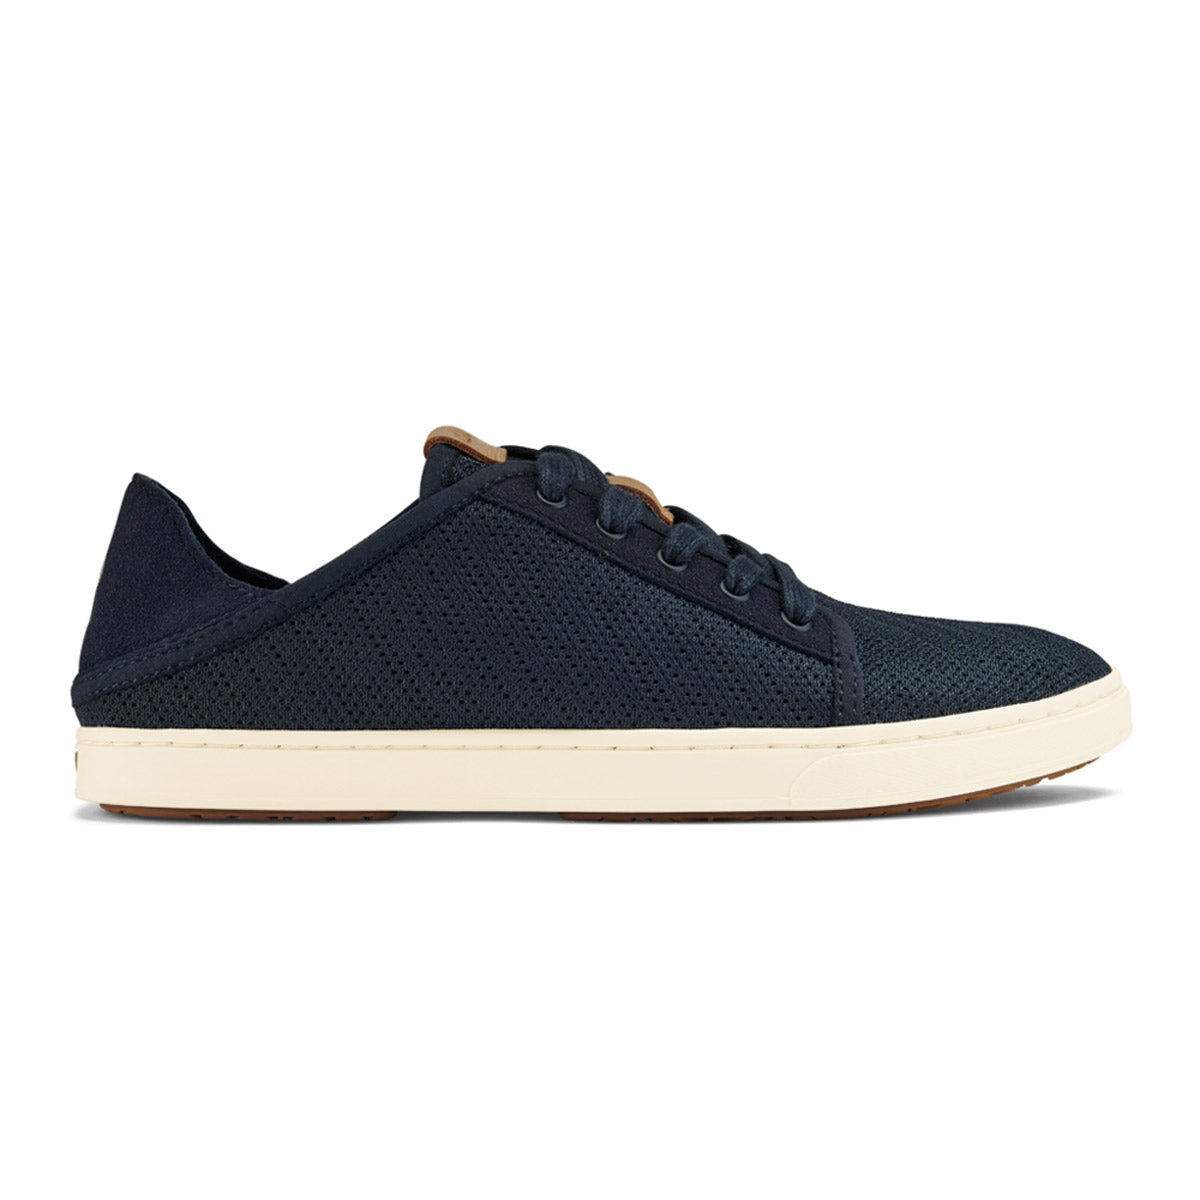 A single Olukai Pehuea Li Trench Blue sneaker with perforated detailing and a non-marking rubber outsole, shown against a white background.